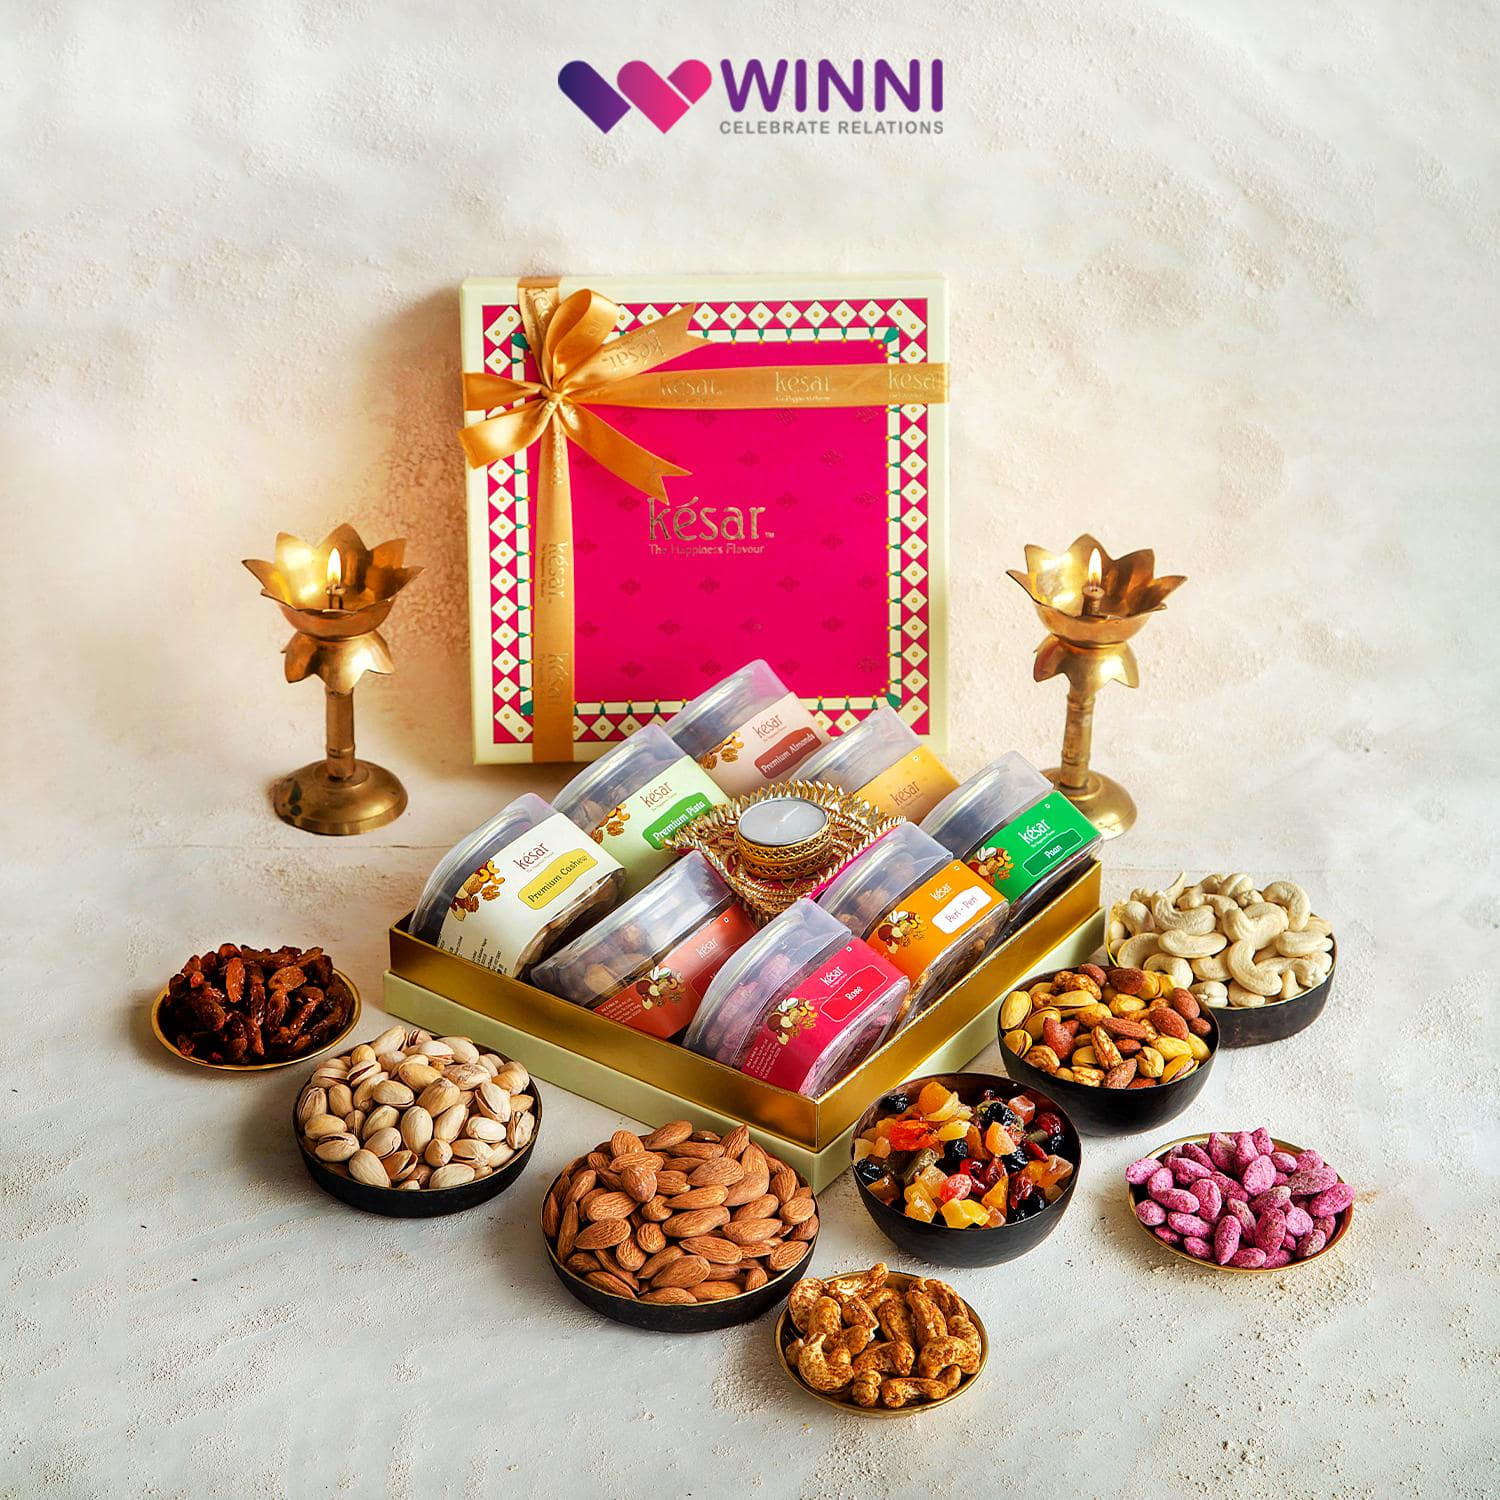 Dry Fruit Box for Diwali Gift- Dry Fruits/Nuts and Chocolate Combo for  Diwali/Deepavali 120